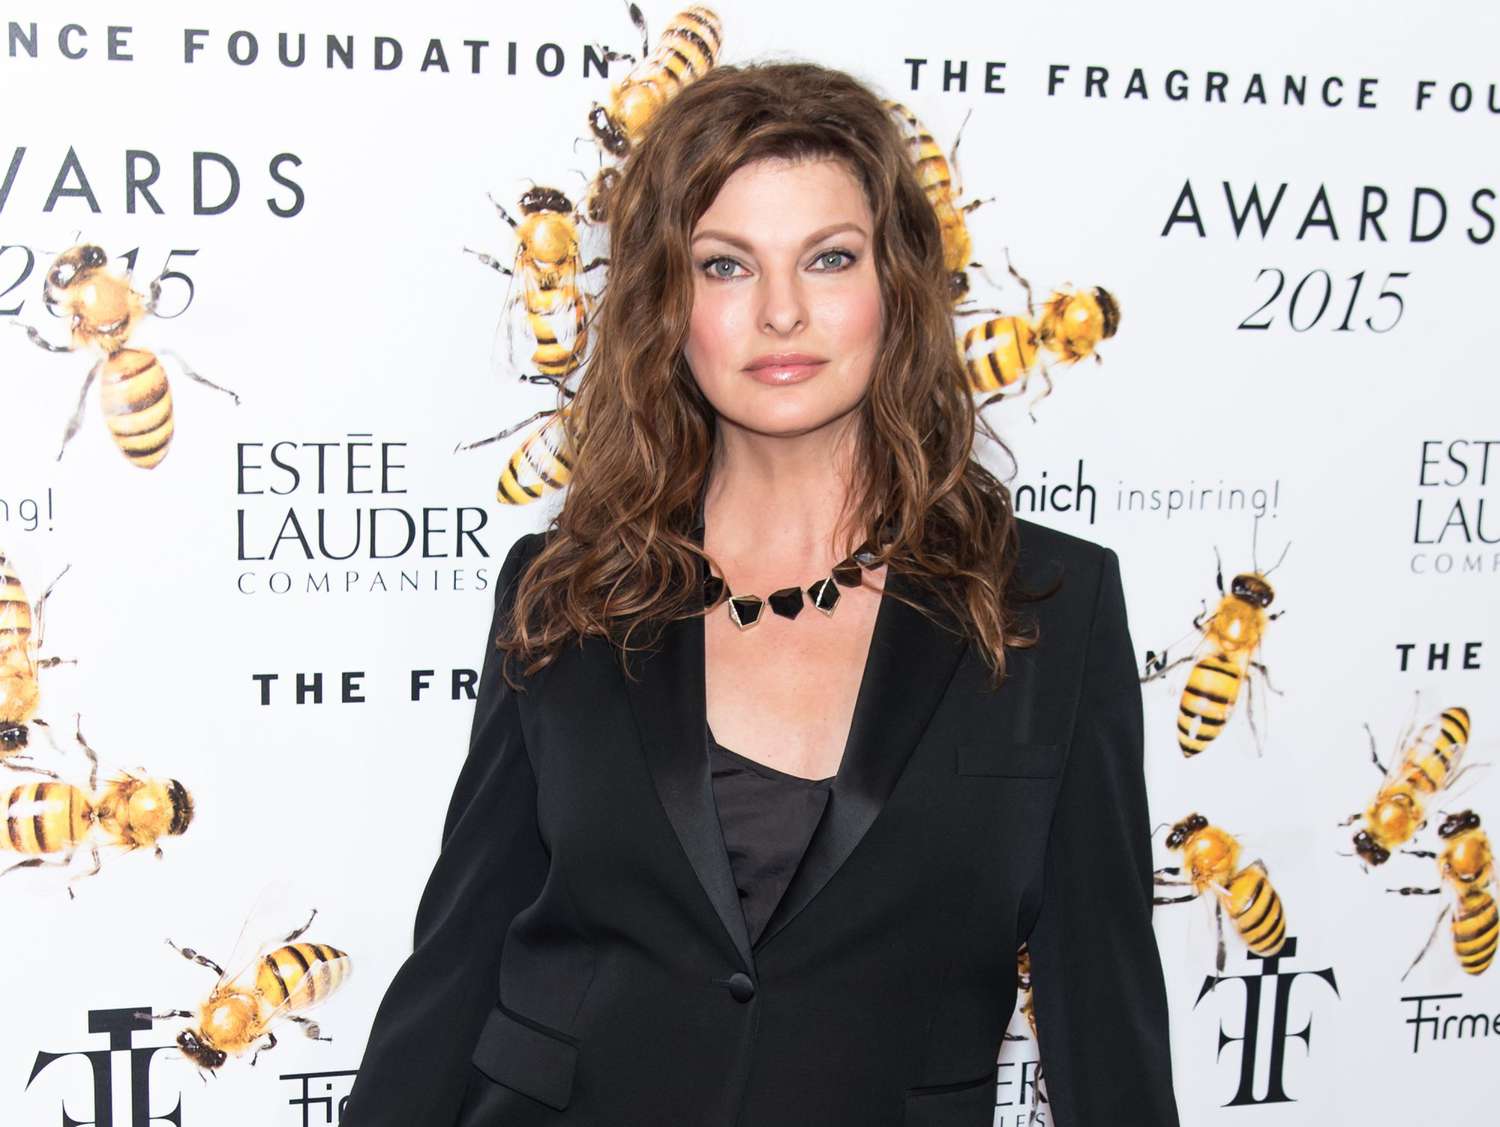 Linda Evangelista Says She’s ‘Pleased to Have Settled’ CoolSculpting Case After Fat-Freezing Trauma